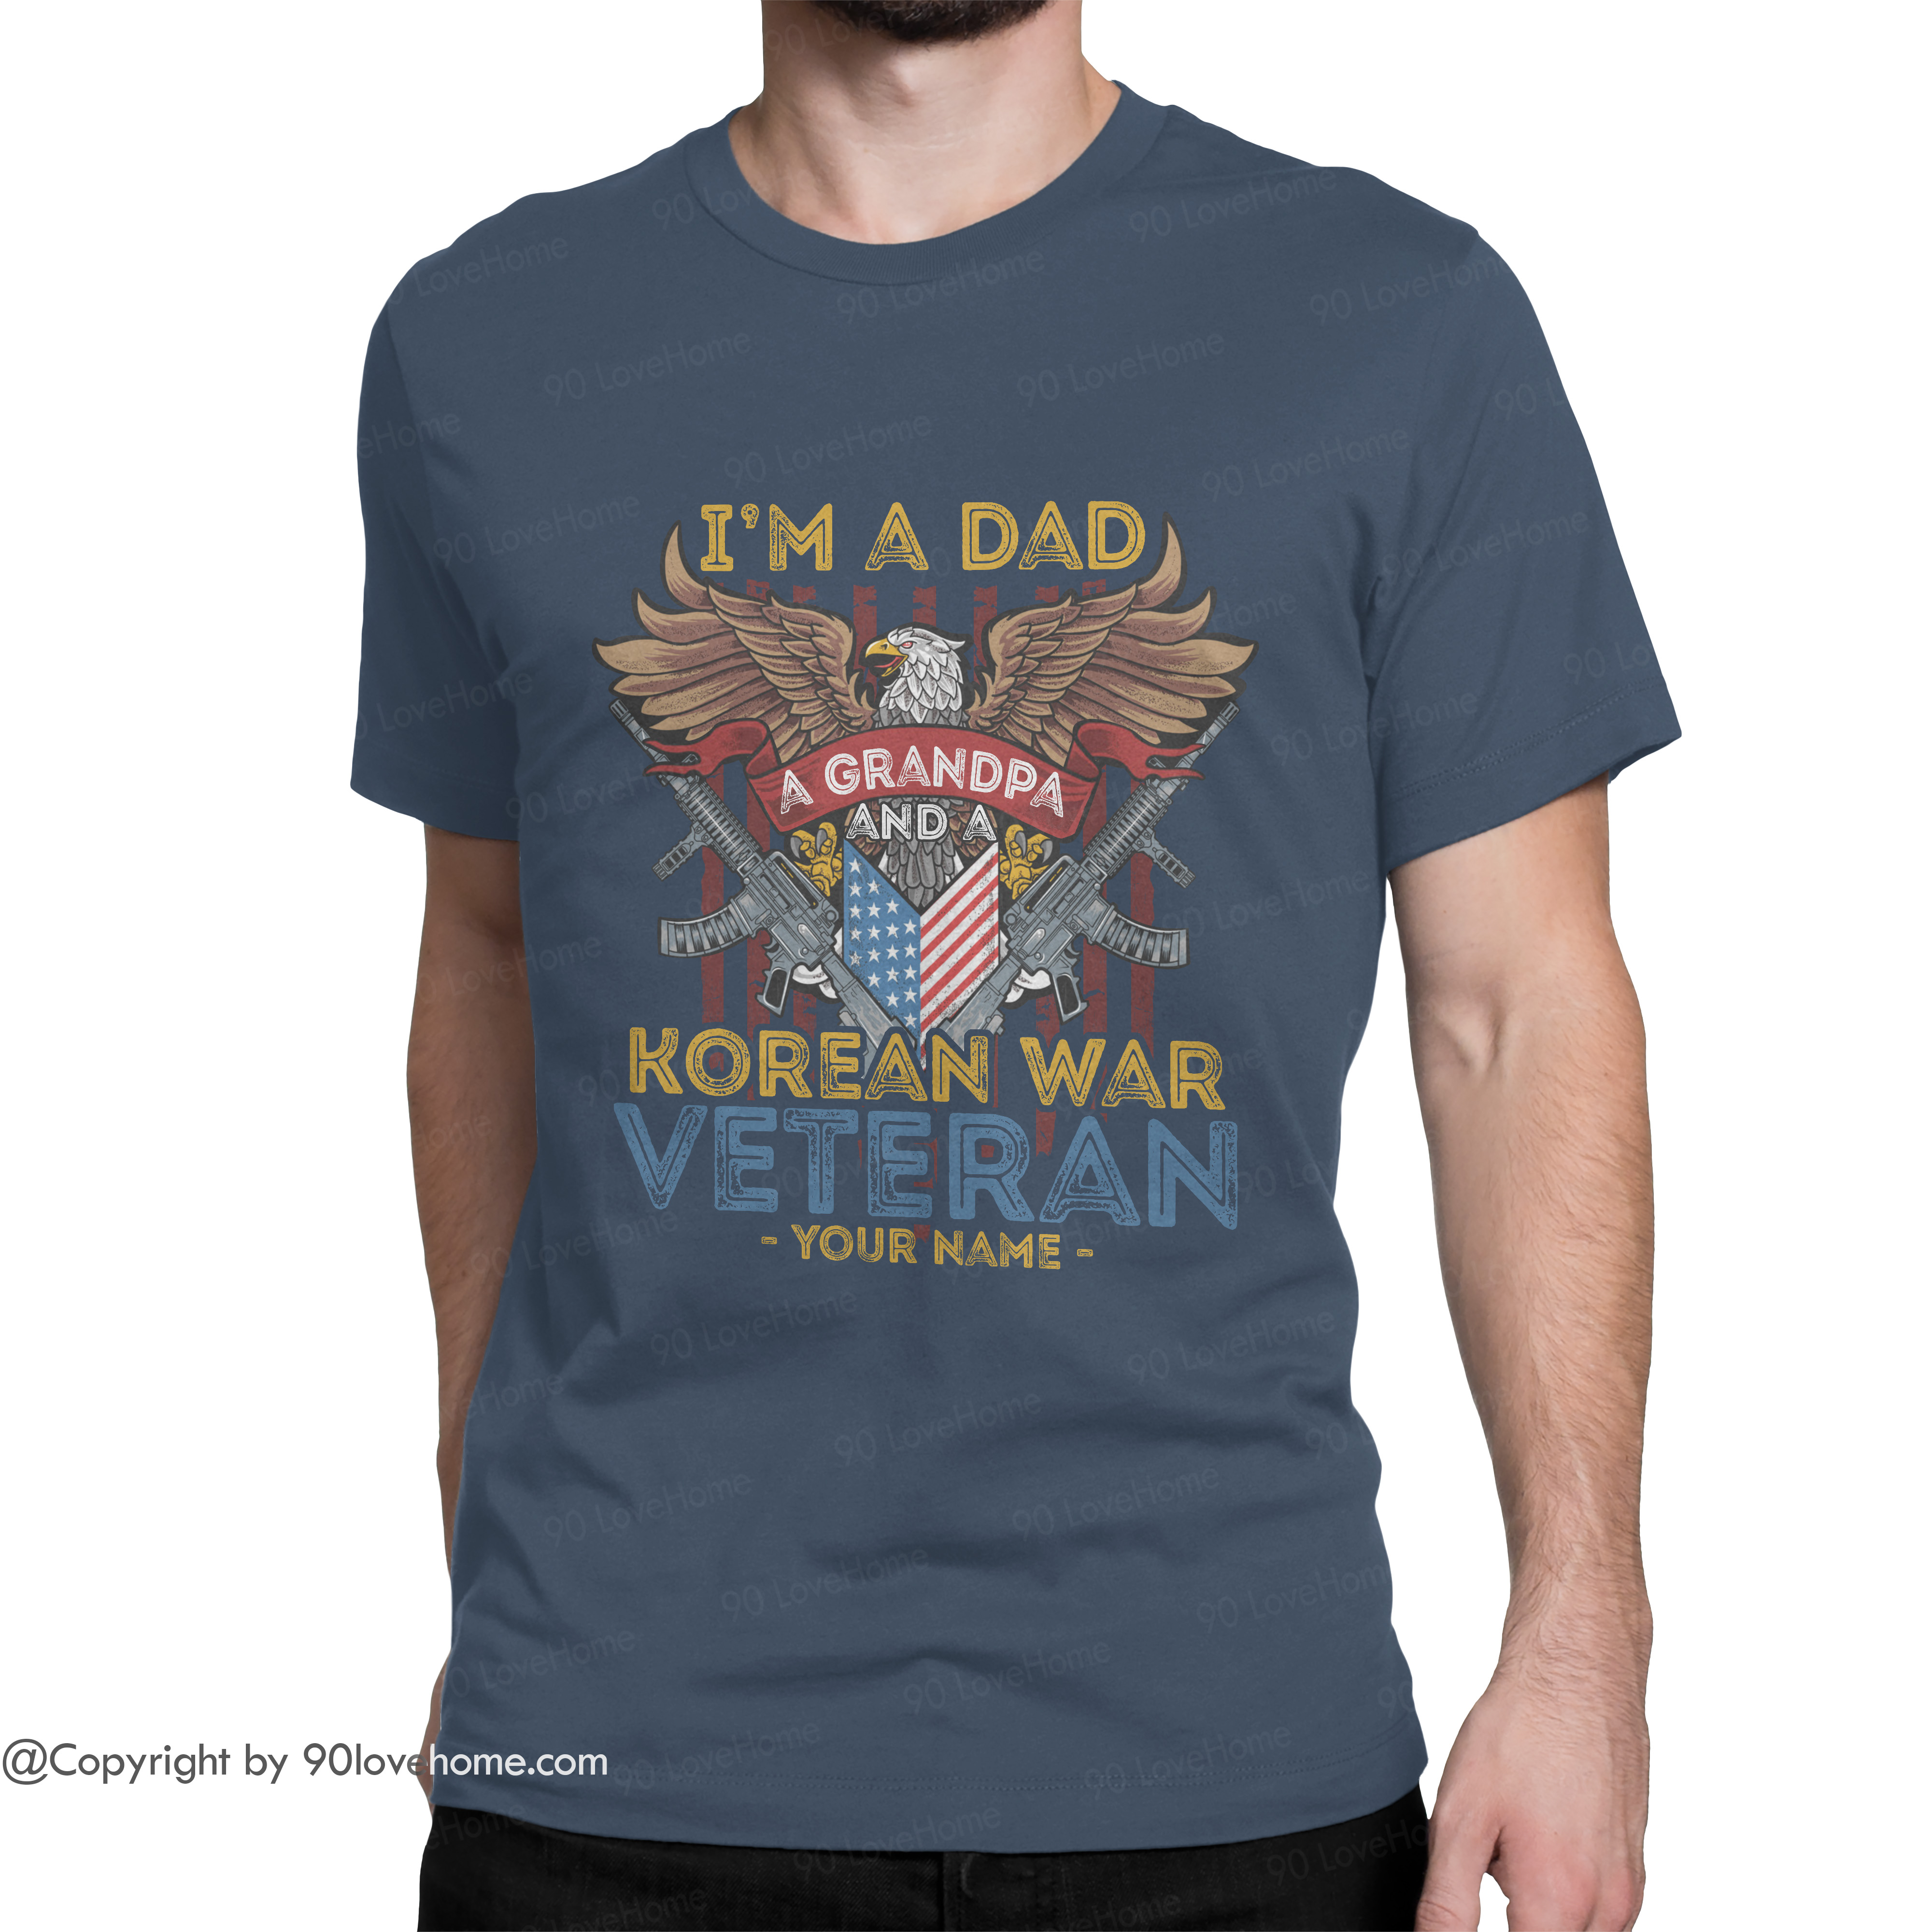 Download Personalized Dad T Shirt Happy Father S Day A Dad A Grandpa And A Korean War Veteran Father Gift Pattern 1 Funny Unisex Tee 90 Lovehome